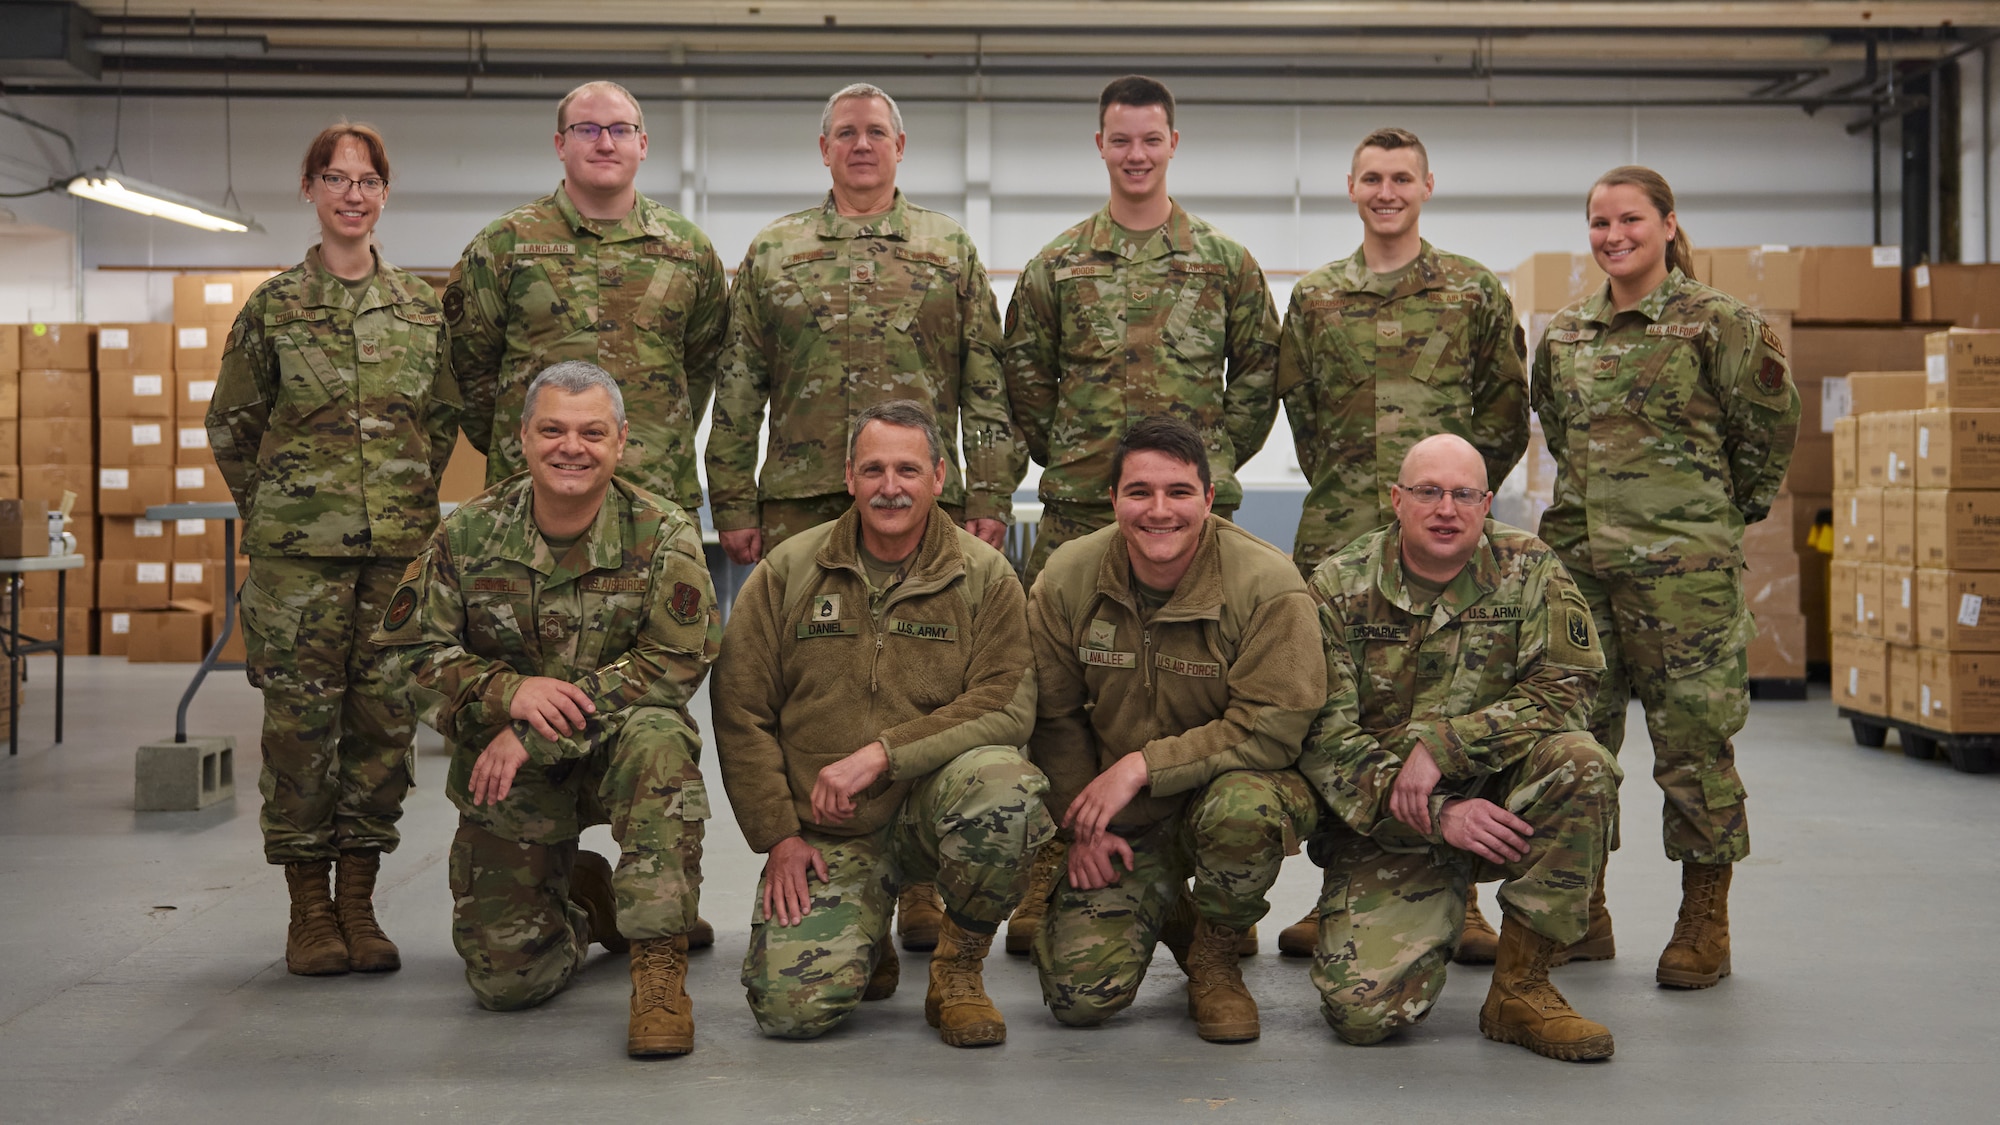 Photo of Airmen and Soldiers from the Vermont National Guard pose for a photo at a distribution center in Vermont, Feb. 8, 2022.